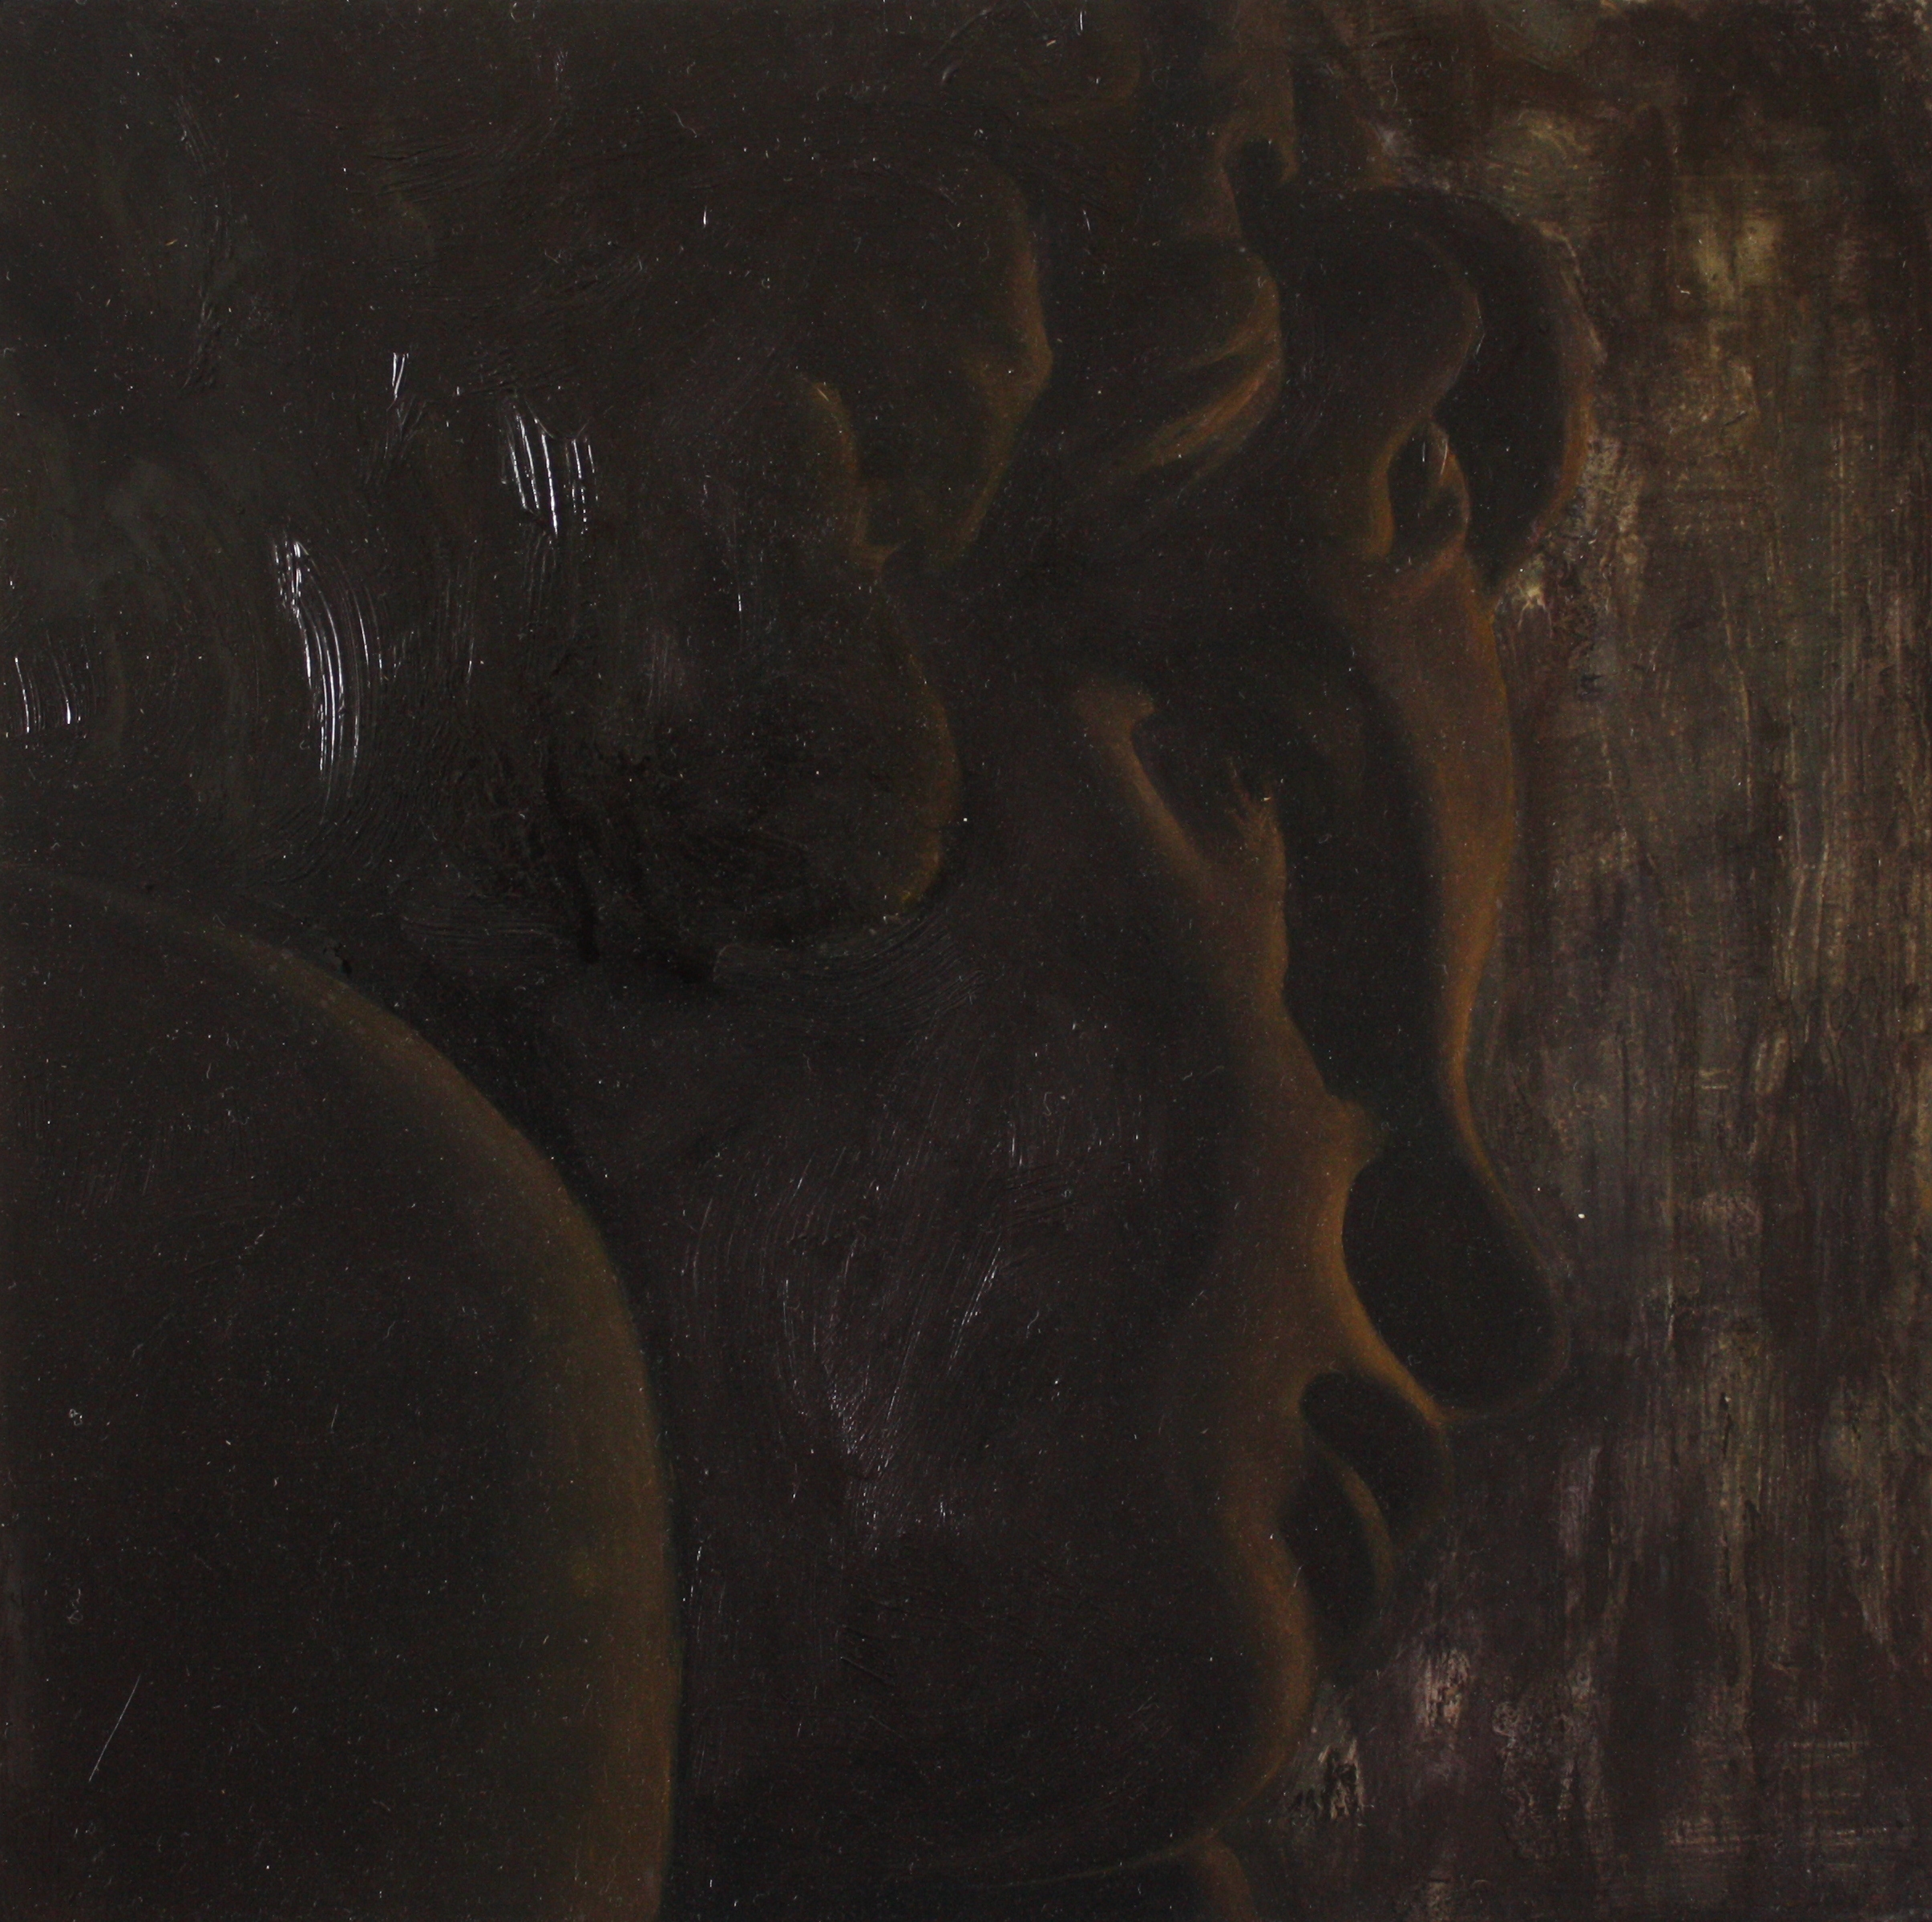   Stones for Eyes, &nbsp;2011, oil on wood panel, 8 x 8 inches 